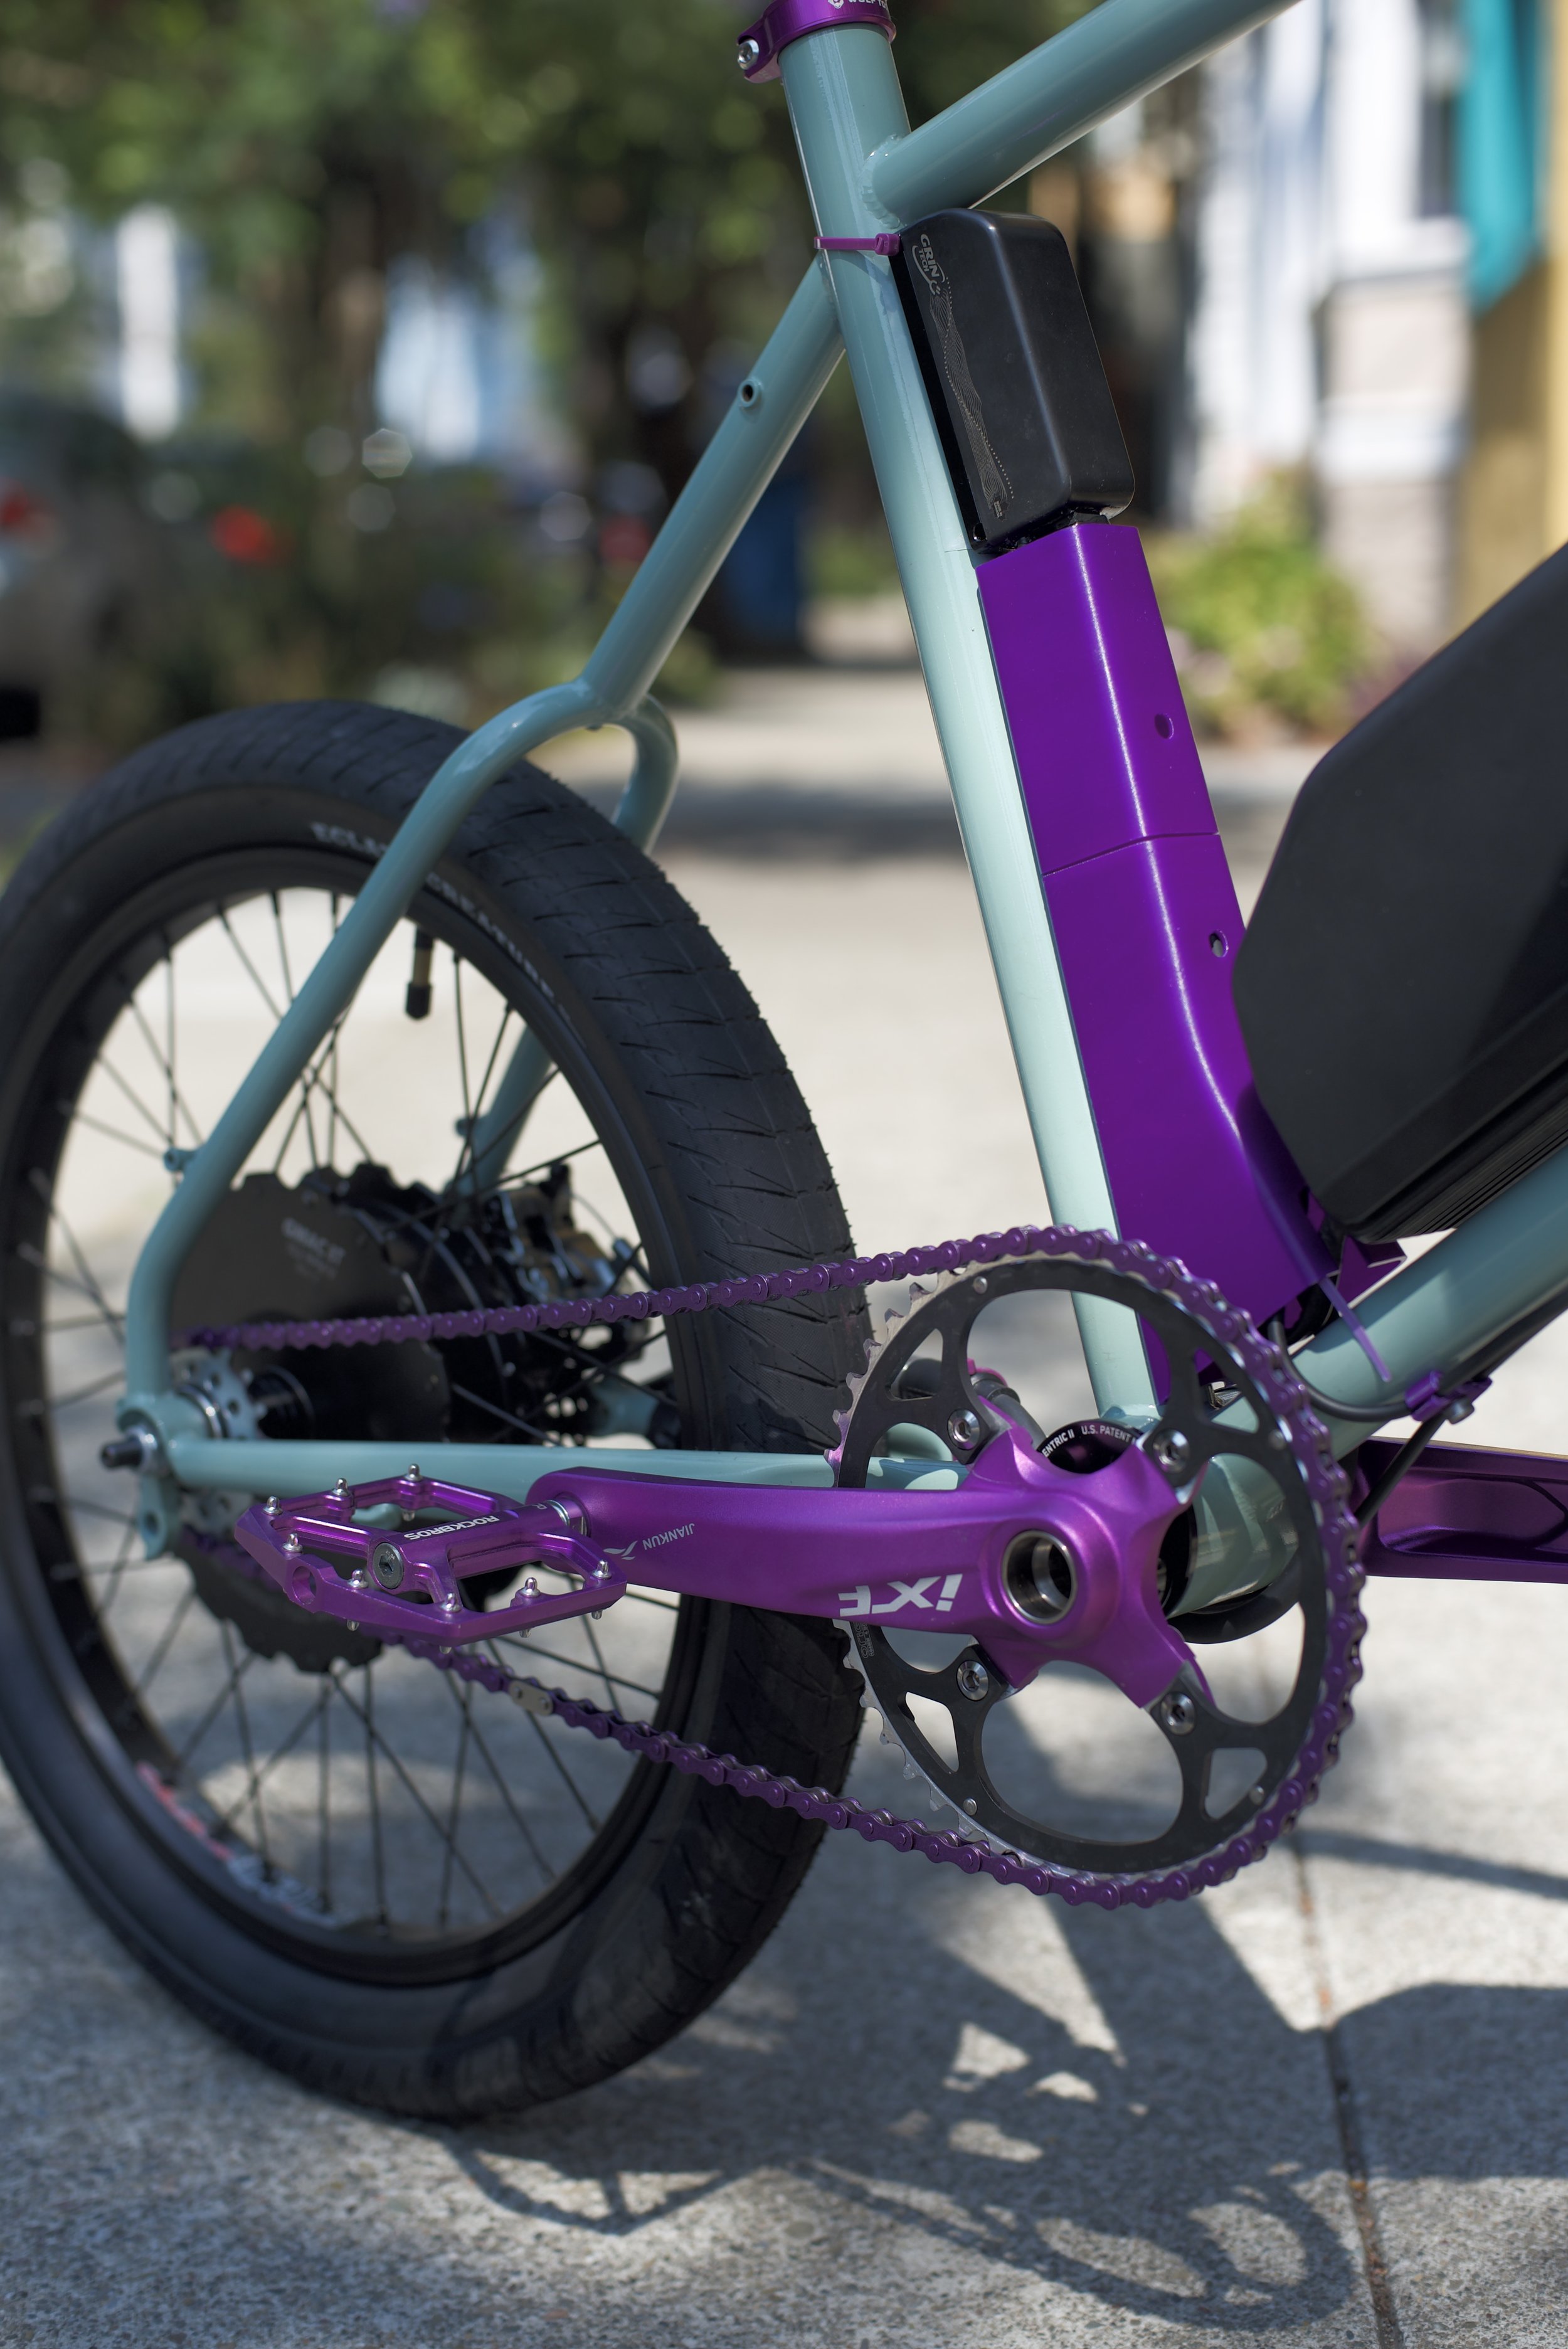   David also designed and printed a bunch of custom parts (purple plastic) for his cable routing.   